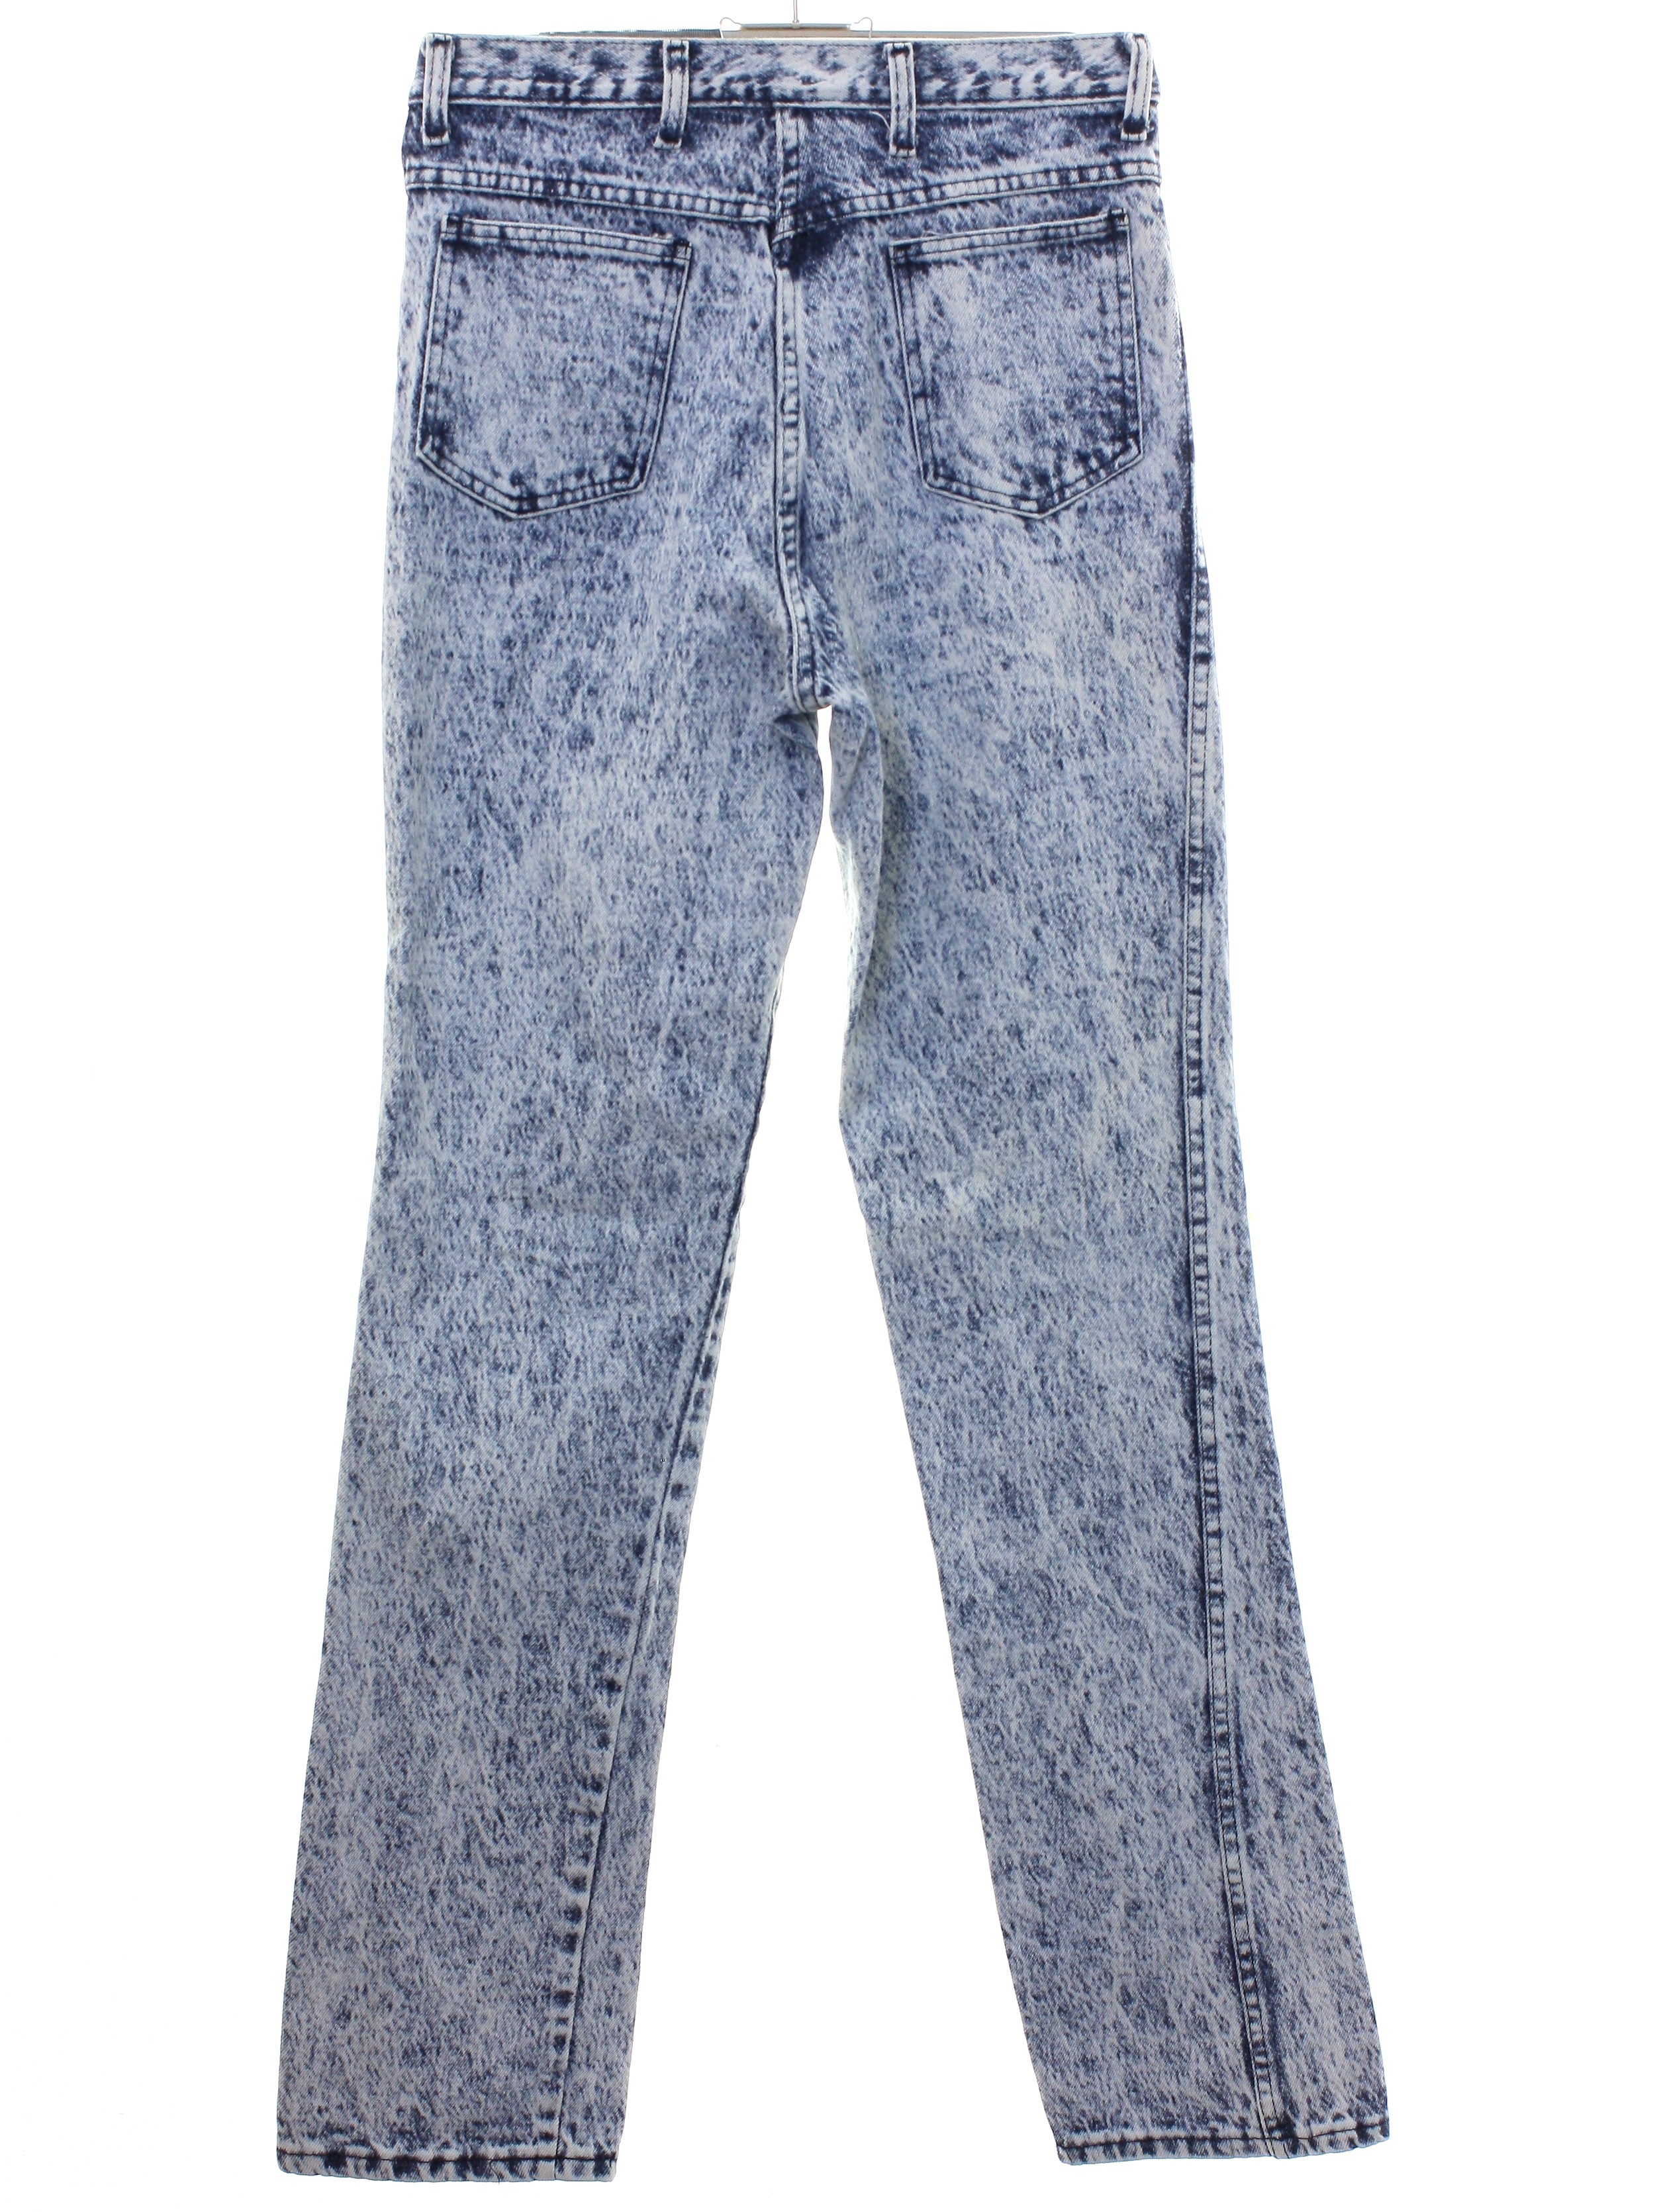 Retro 1980s Pants: 80s -Bristol Bluts- Womens acid washed blue and ...